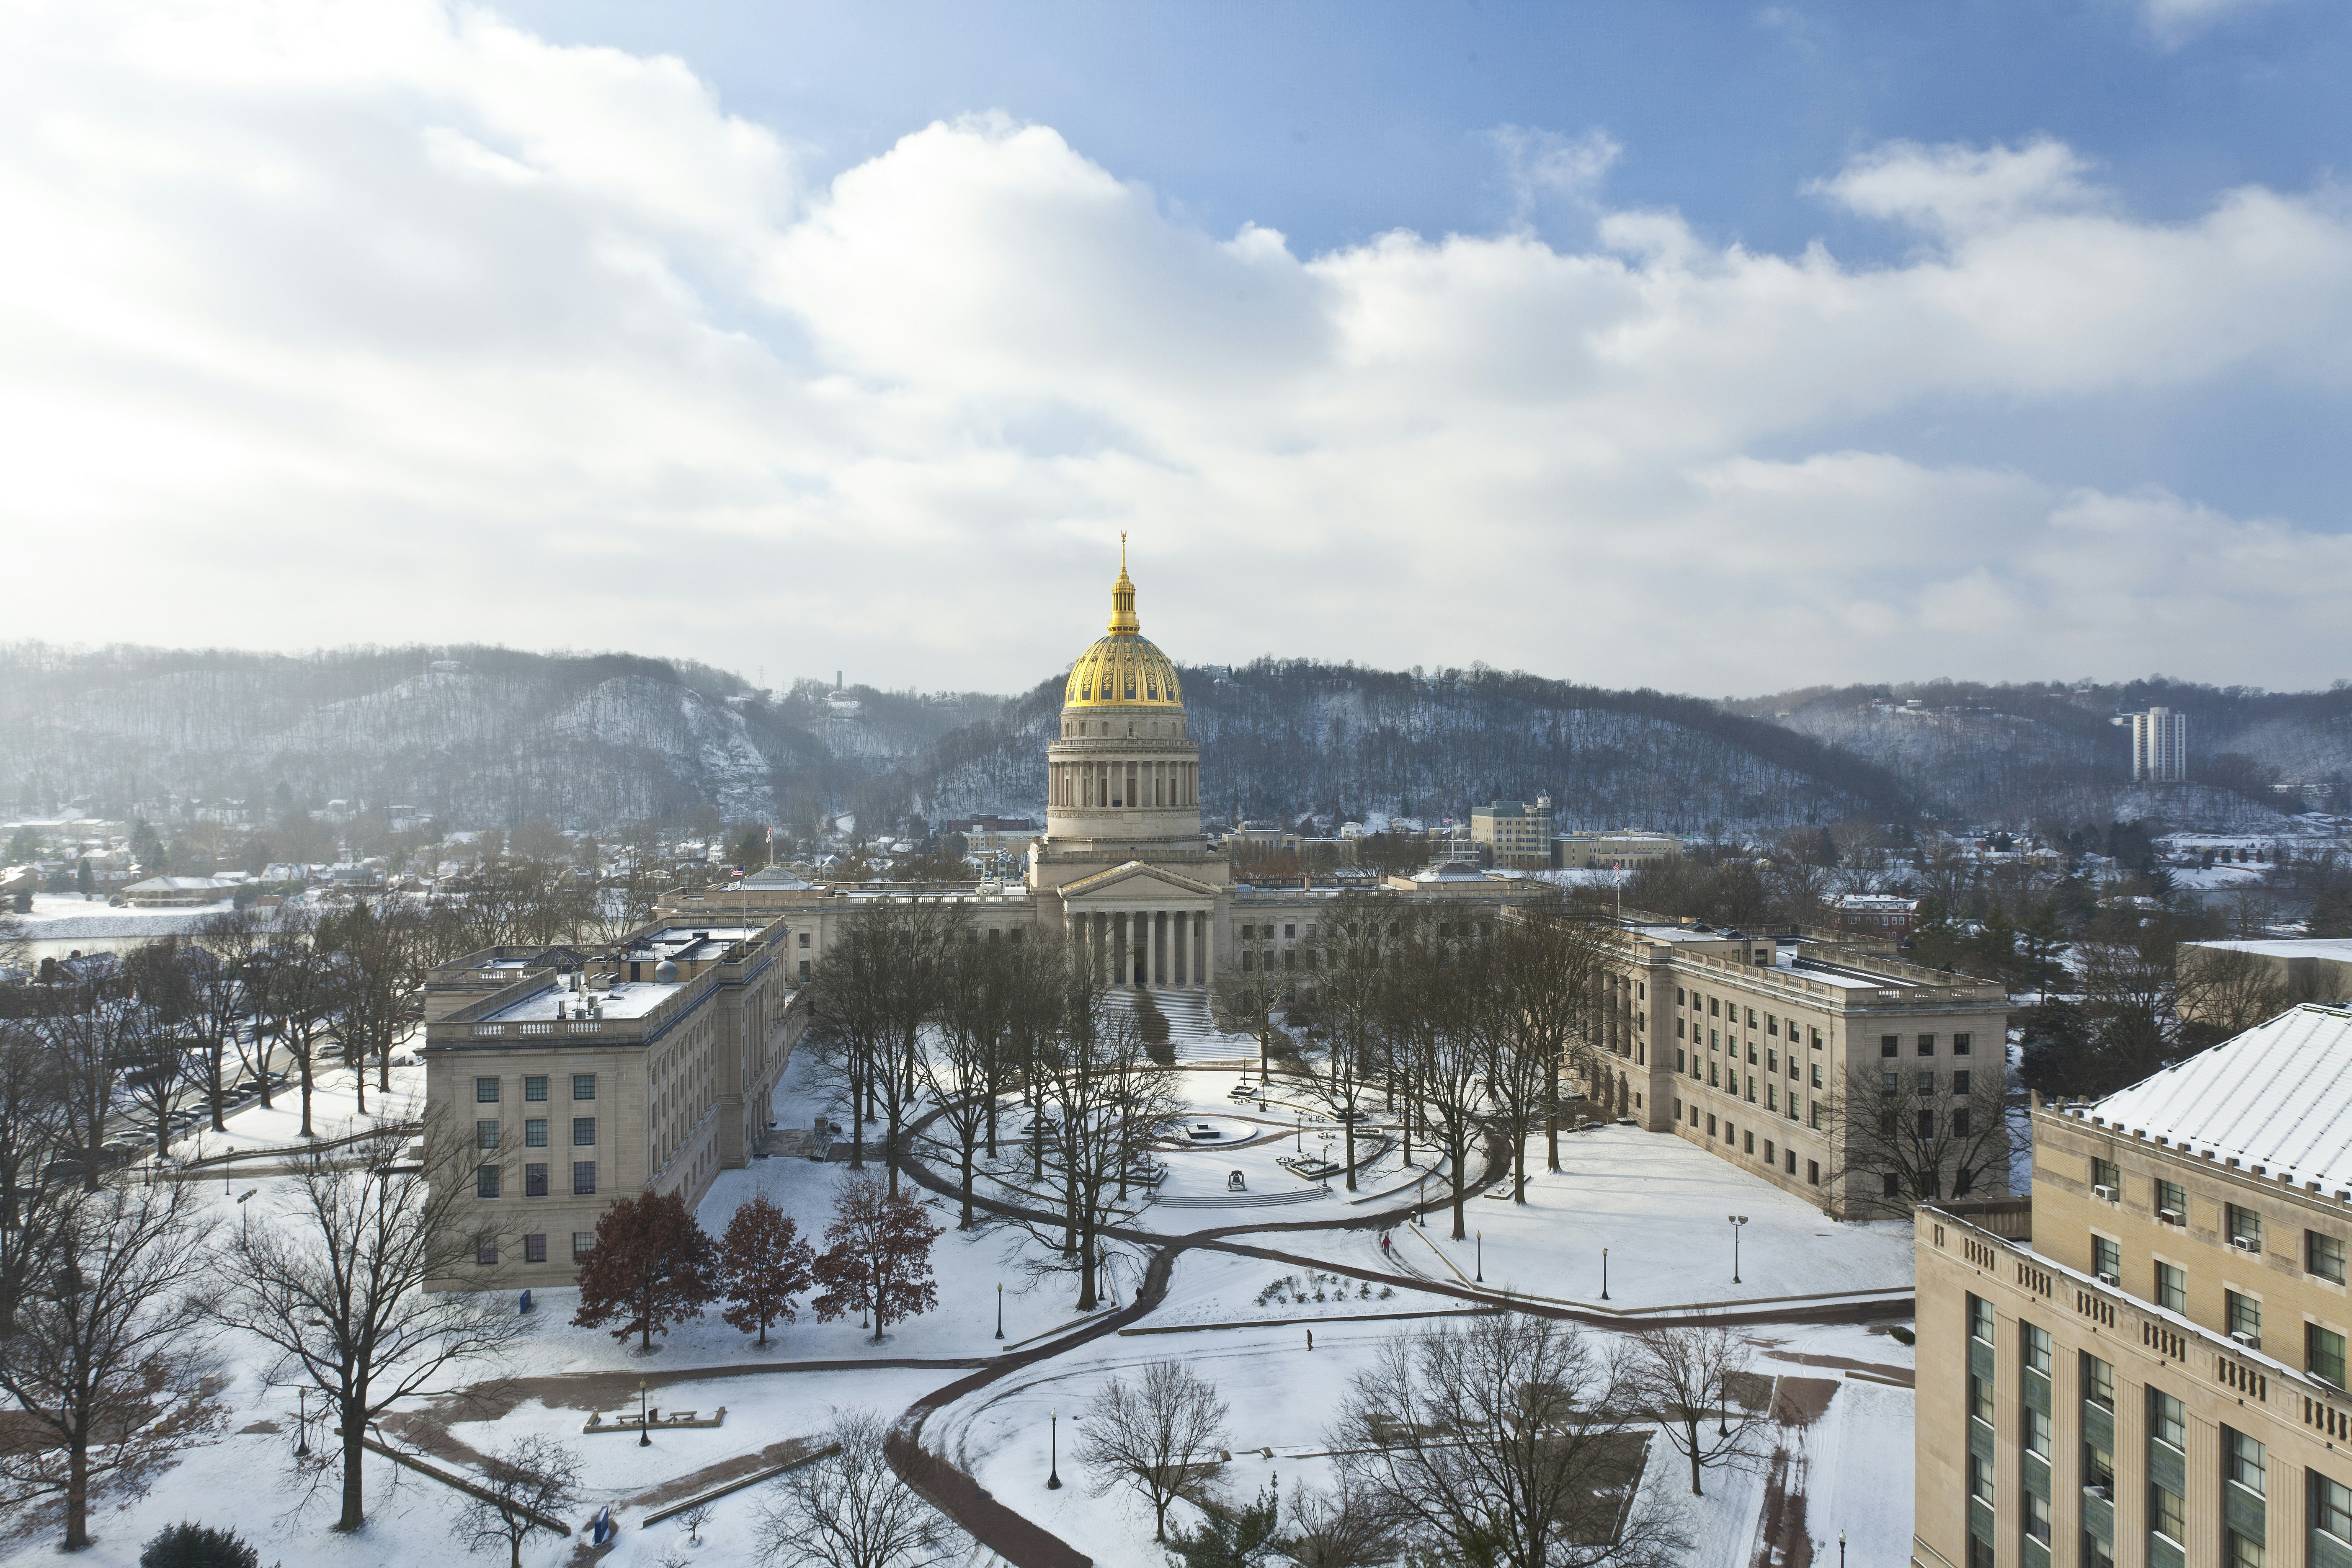 The gold dome of the West Virginia State Capitol building and surrounding campus under a blanket of snow. 